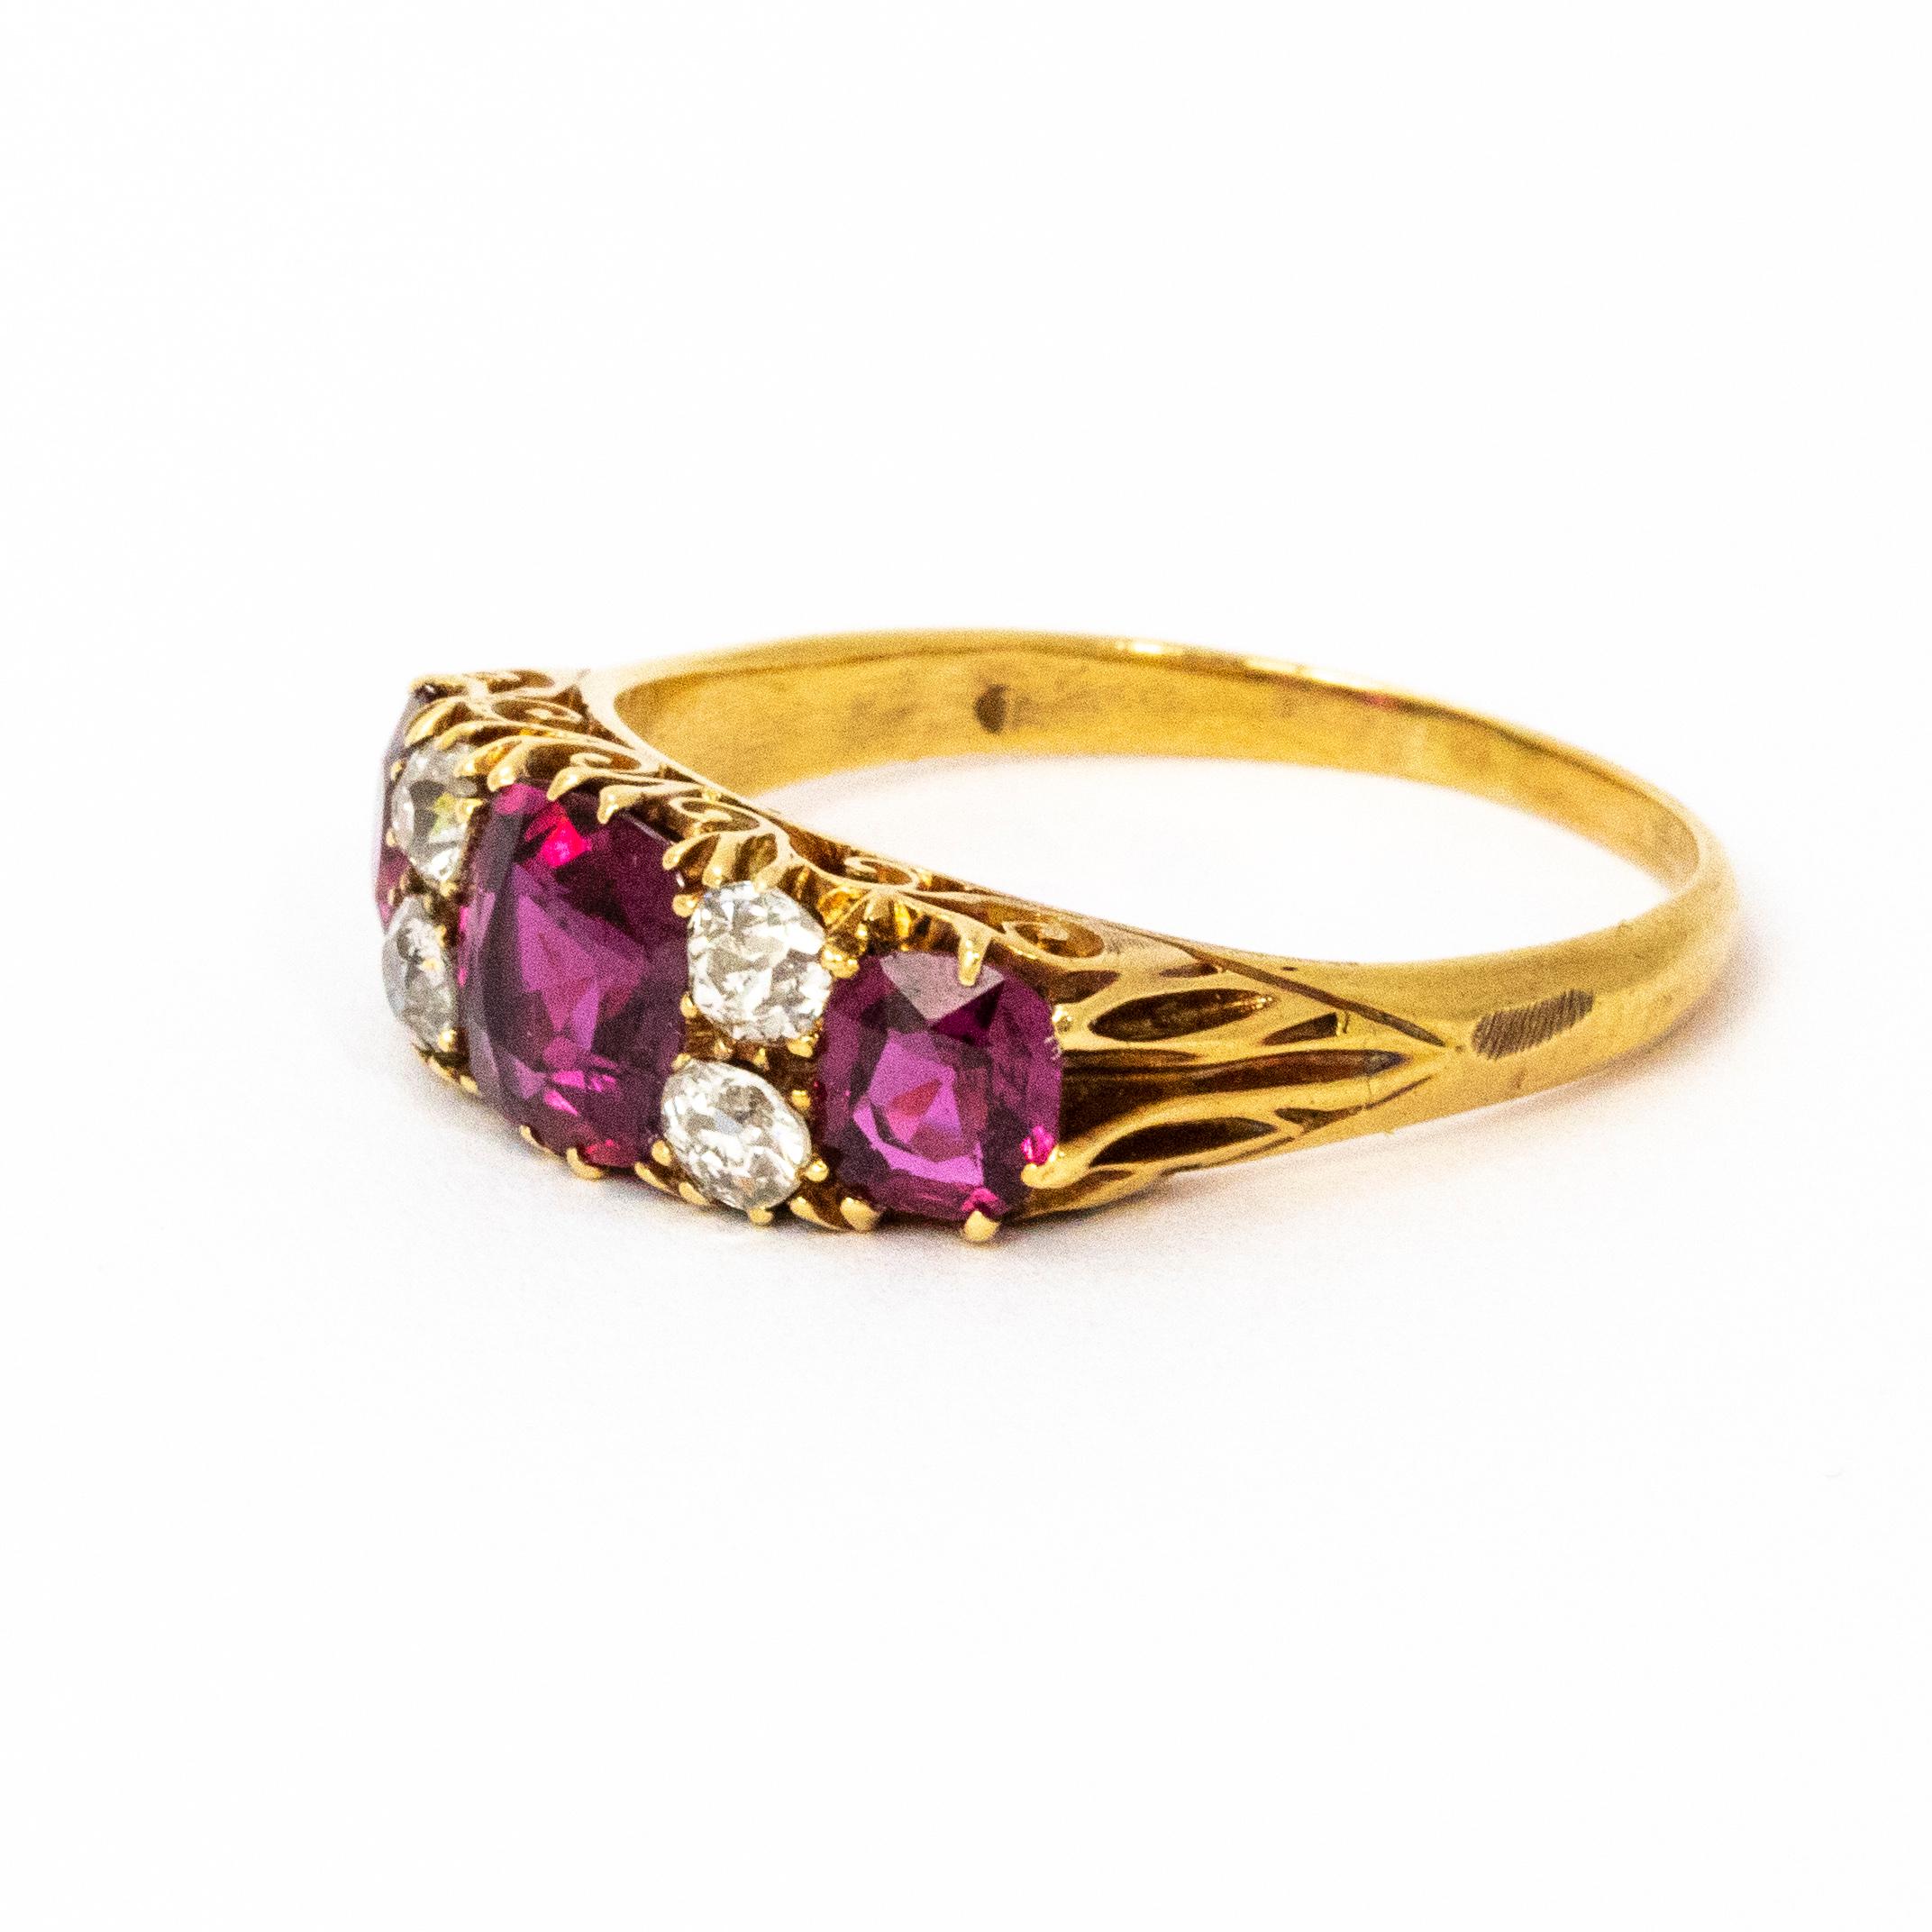 Certified dazzling natural ruby and diamond ring beautifully set in 18ct gold. Rubies in total weighing 2.30 carats.

Ring Size: O or 7